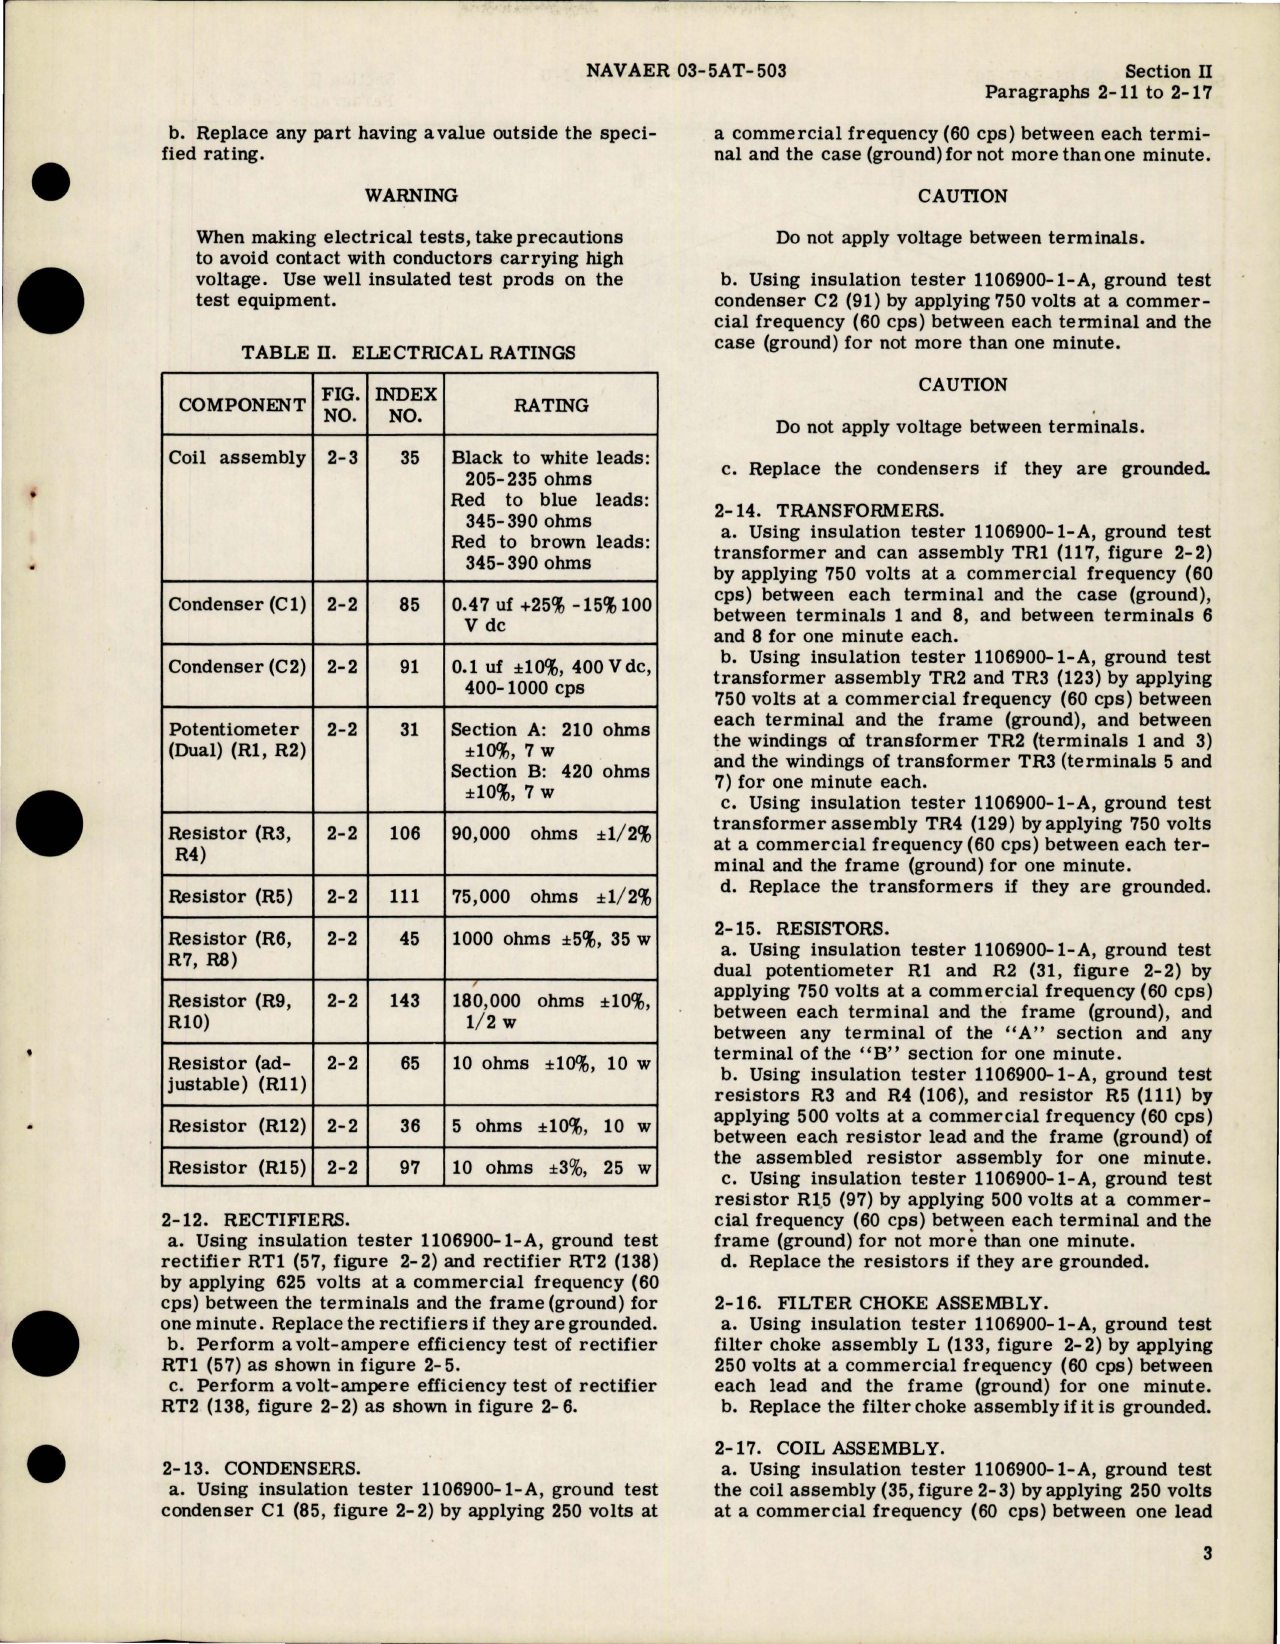 Sample page 7 from AirCorps Library document: Overhaul Instructions for Voltage Regulator and Mounting Base Assembly - Type 40E44-1-A